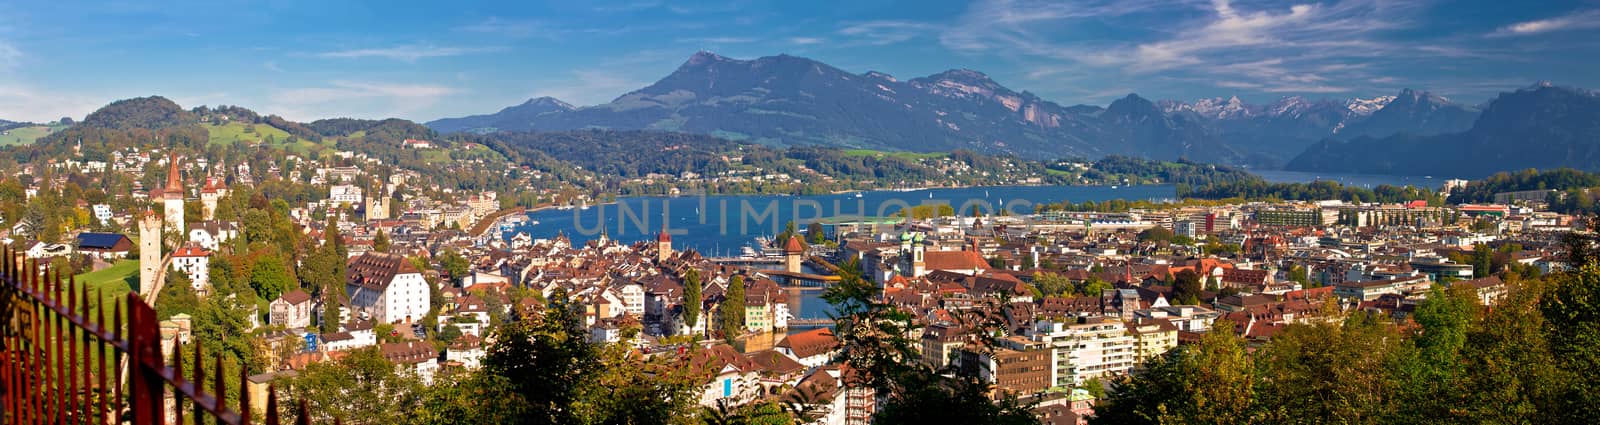 City and lake of Luzern panoramic aerial view by xbrchx